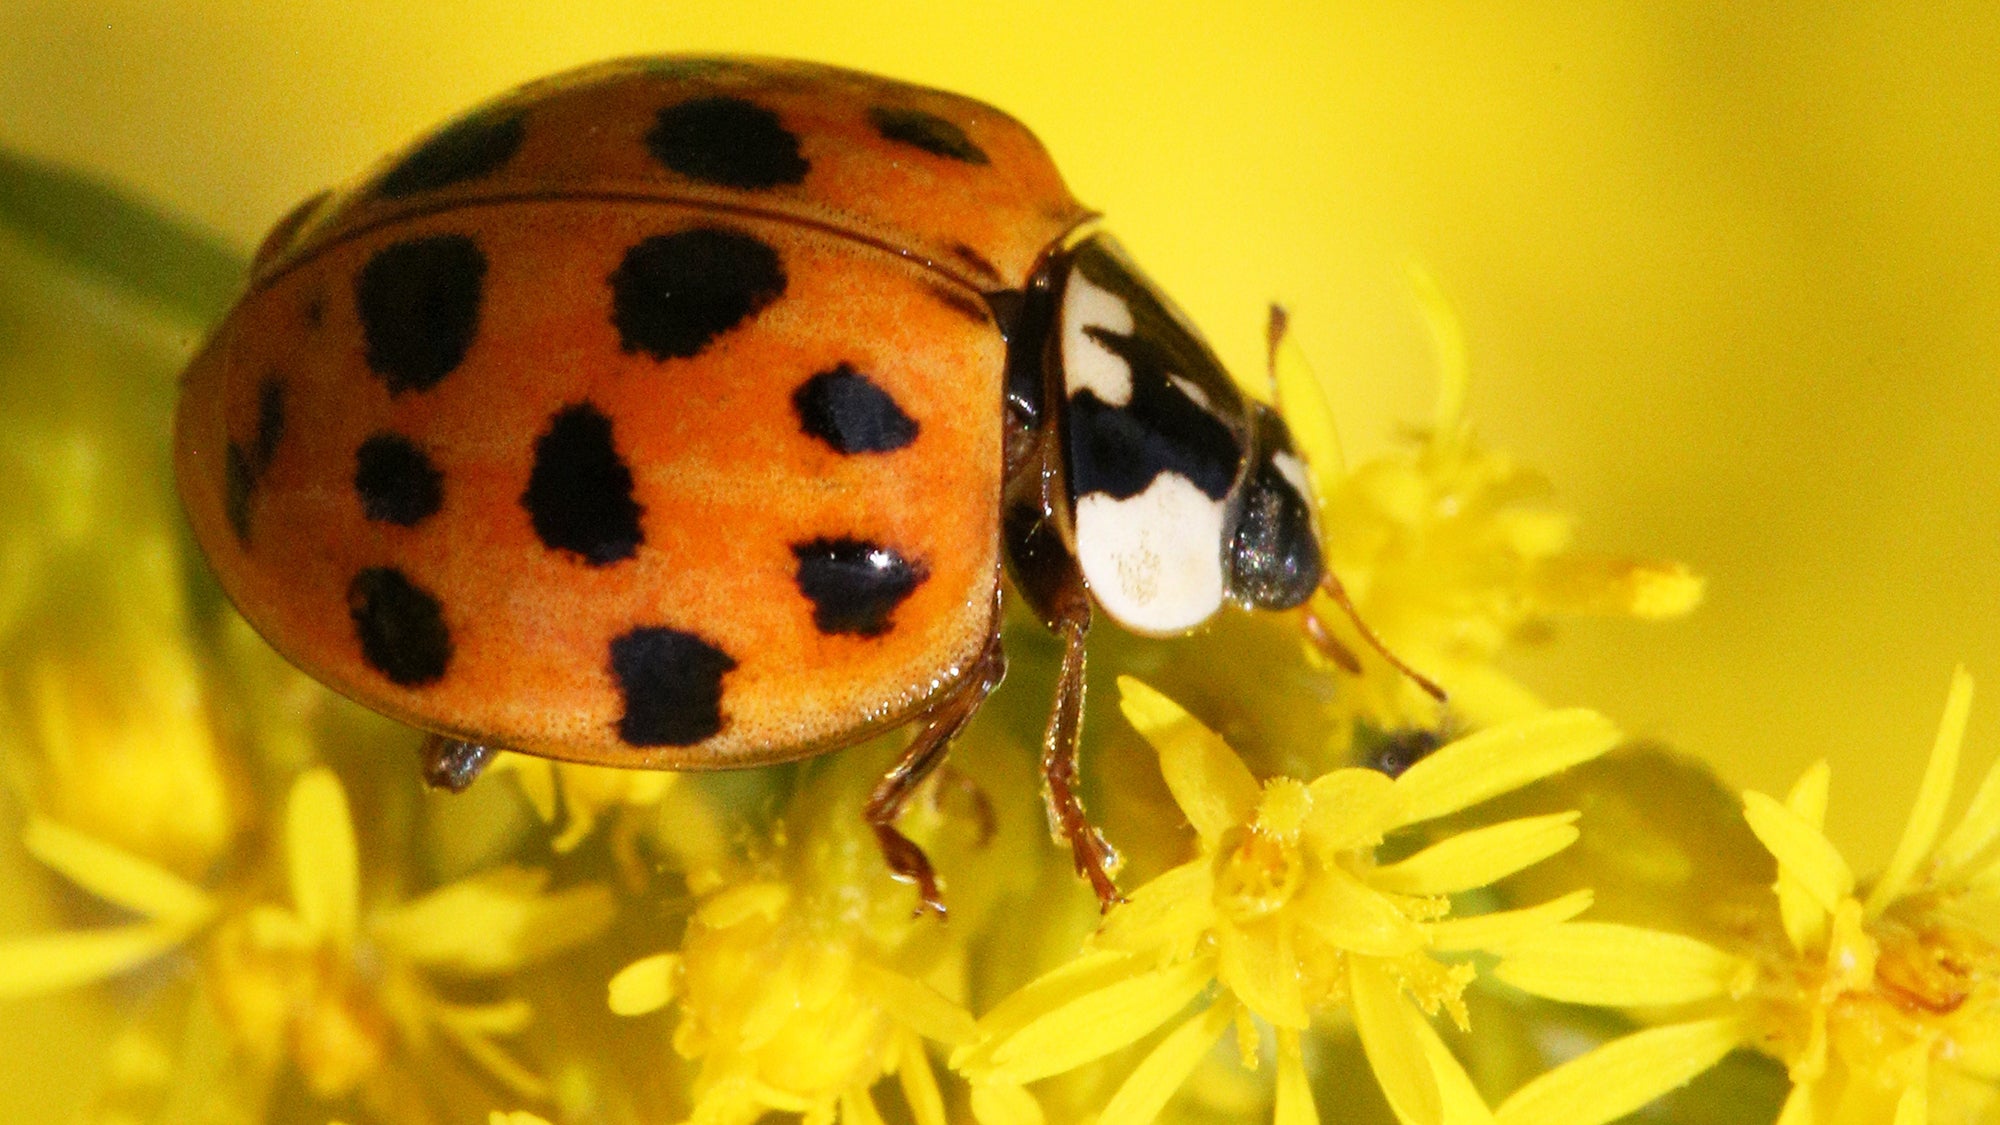 Why are there so many ladybugs and lady beetles?